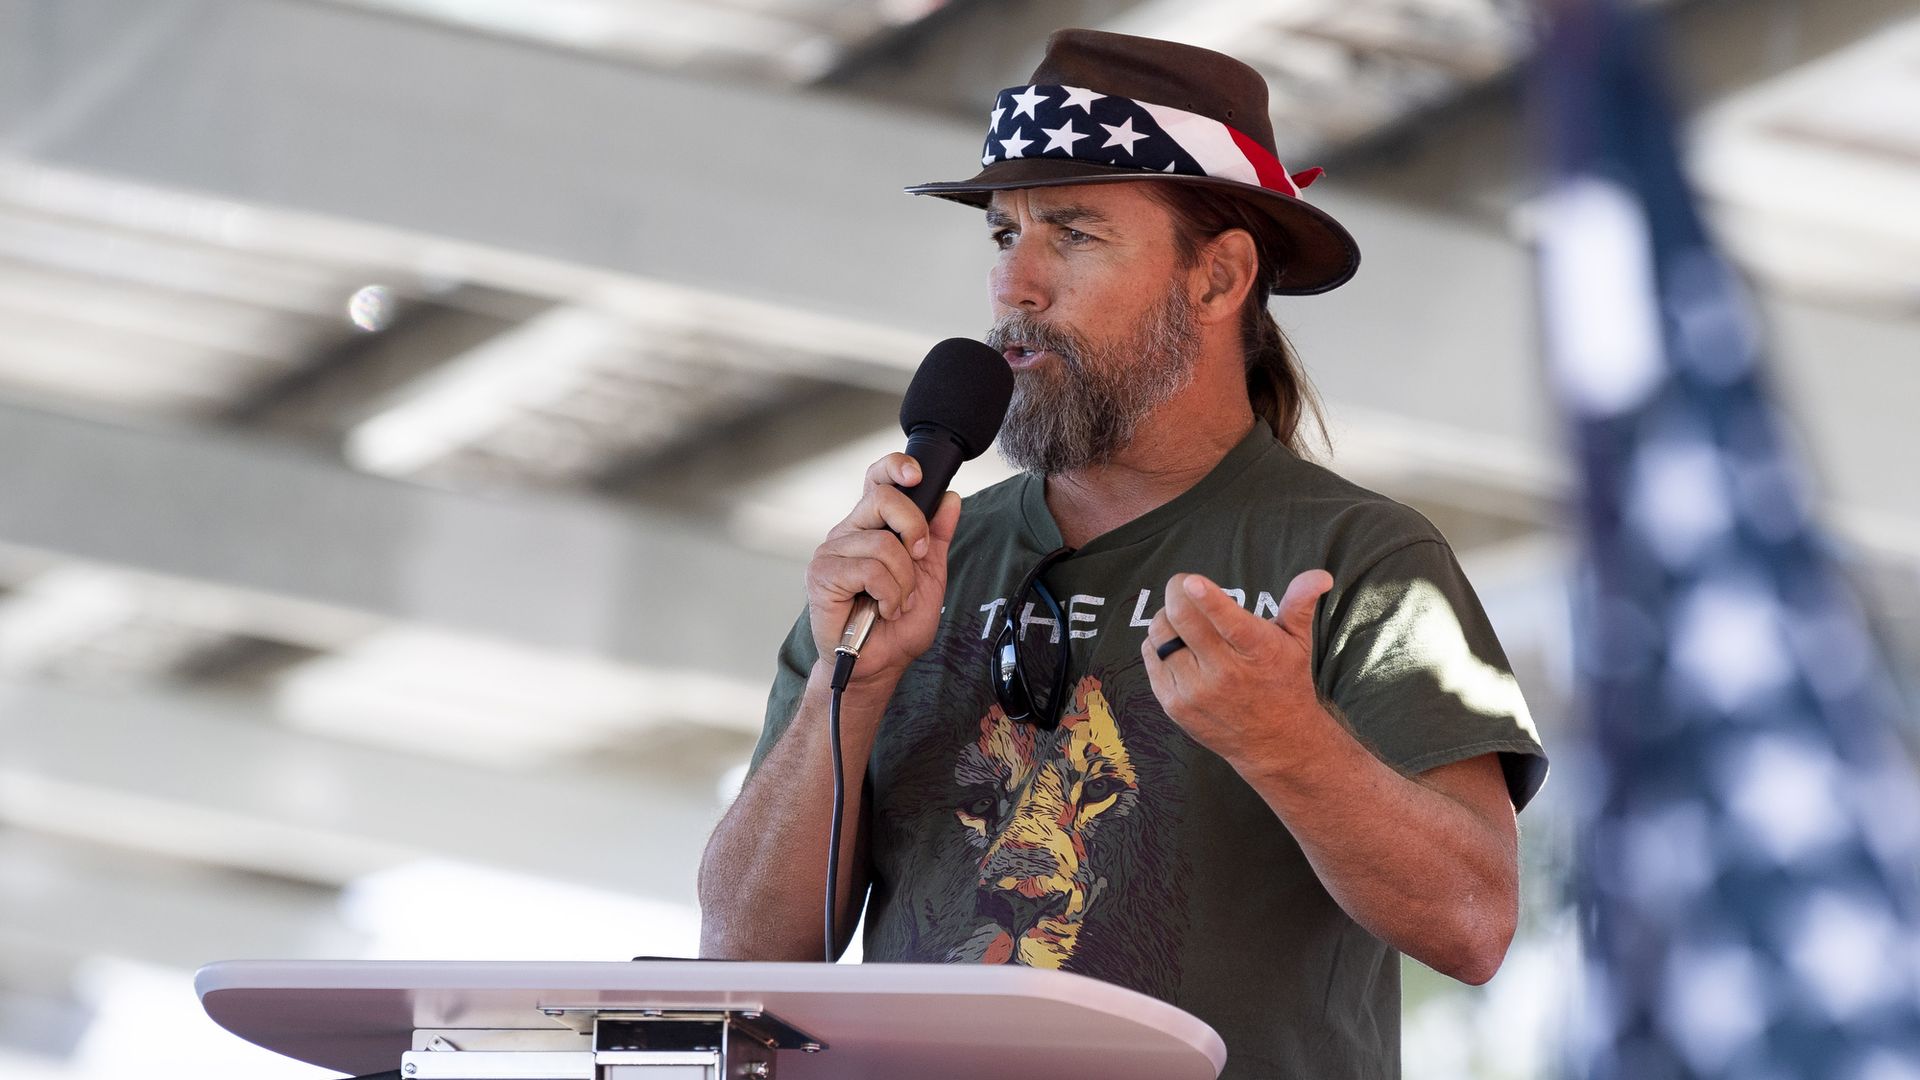 Alan Hostetter speaks during a pro-Trump election integrity rally he organized at the Orange County Registrar of Voters offices in Santa Ana, CA on Monday, November 9, 2020.